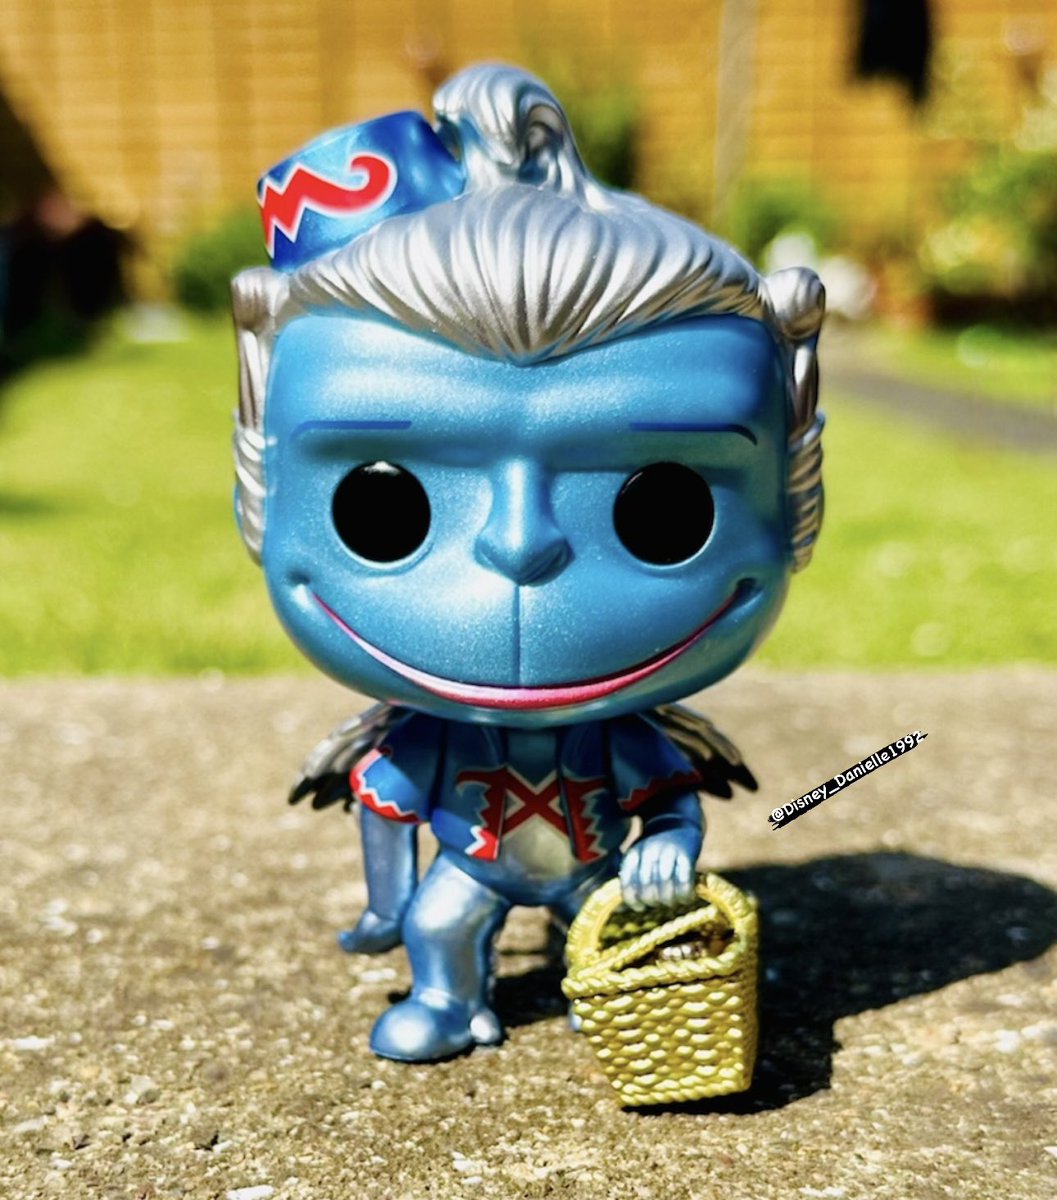 He looks so amazing out of the box too! 😍🤩 Took a better picture than the one I uploaded earlier on Insta cause the sun shining on him really makes the metallic on him POP! (Pardon the pun) 😅😂

#FunkoPOPVinyl #MyFunkoStory #FunkoUnboxed #Funko 

@OriginalFunko @FunkoEurope